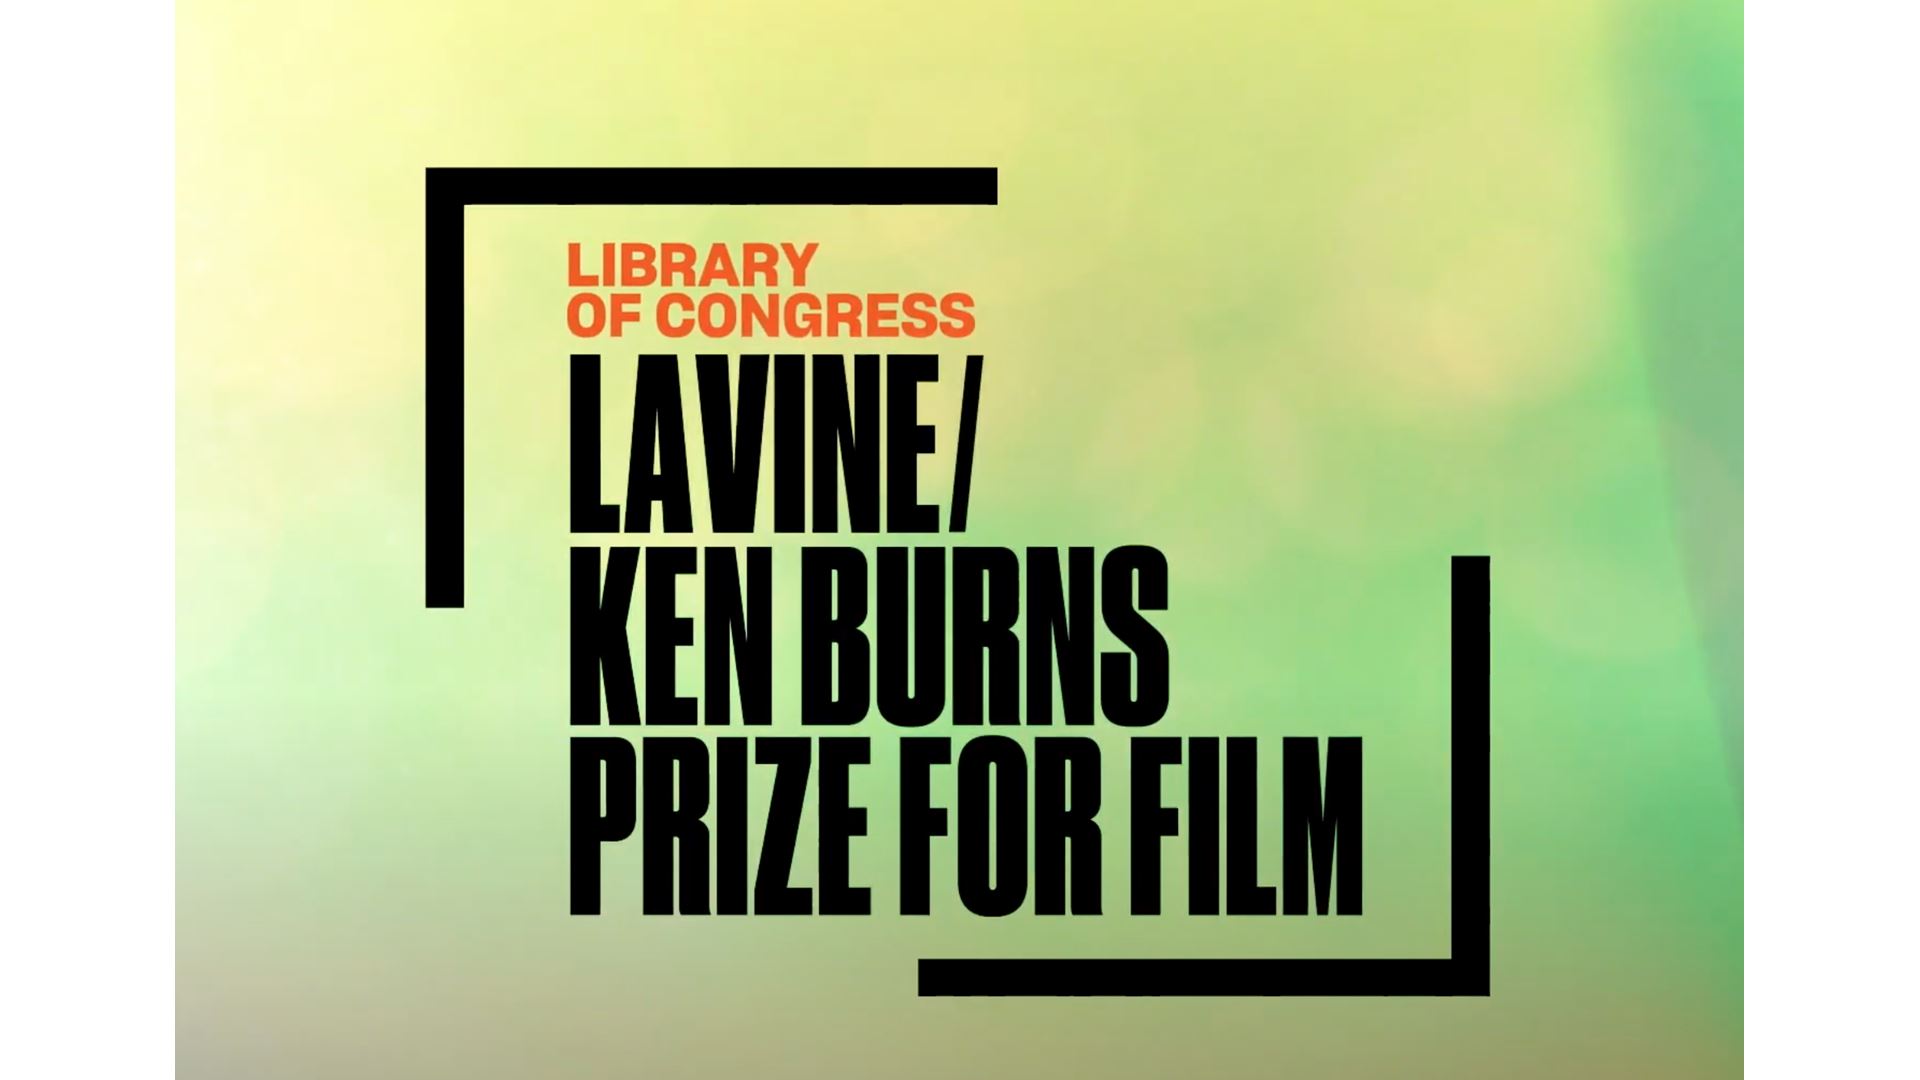 TOP SIX FINALISTS ANNOUNCED FOR FOURTH ANNUAL LIBRARY OF CONGRESS LAVINE/KEN BURNS PRIZE FOR FILM